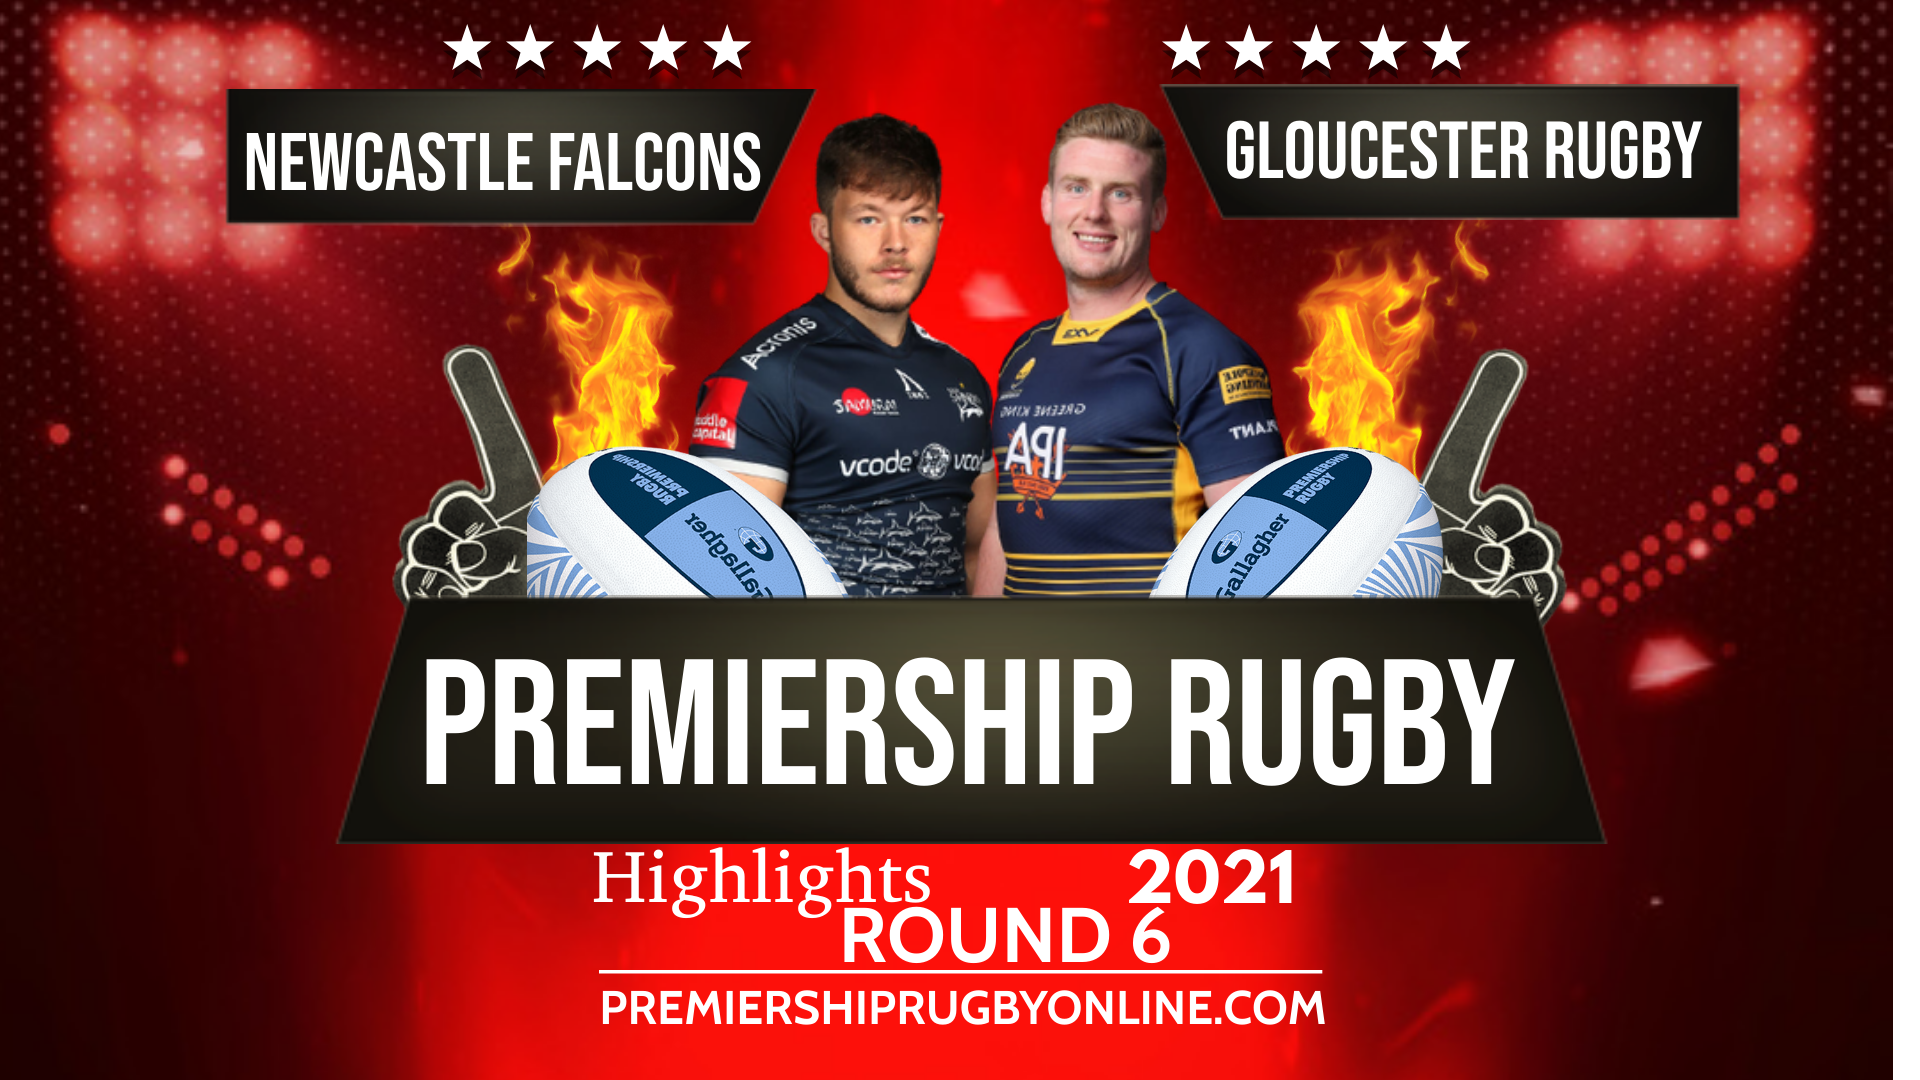 Newcastle Falcons Vs Gloucester Rugby Highlights 2021 RD 6